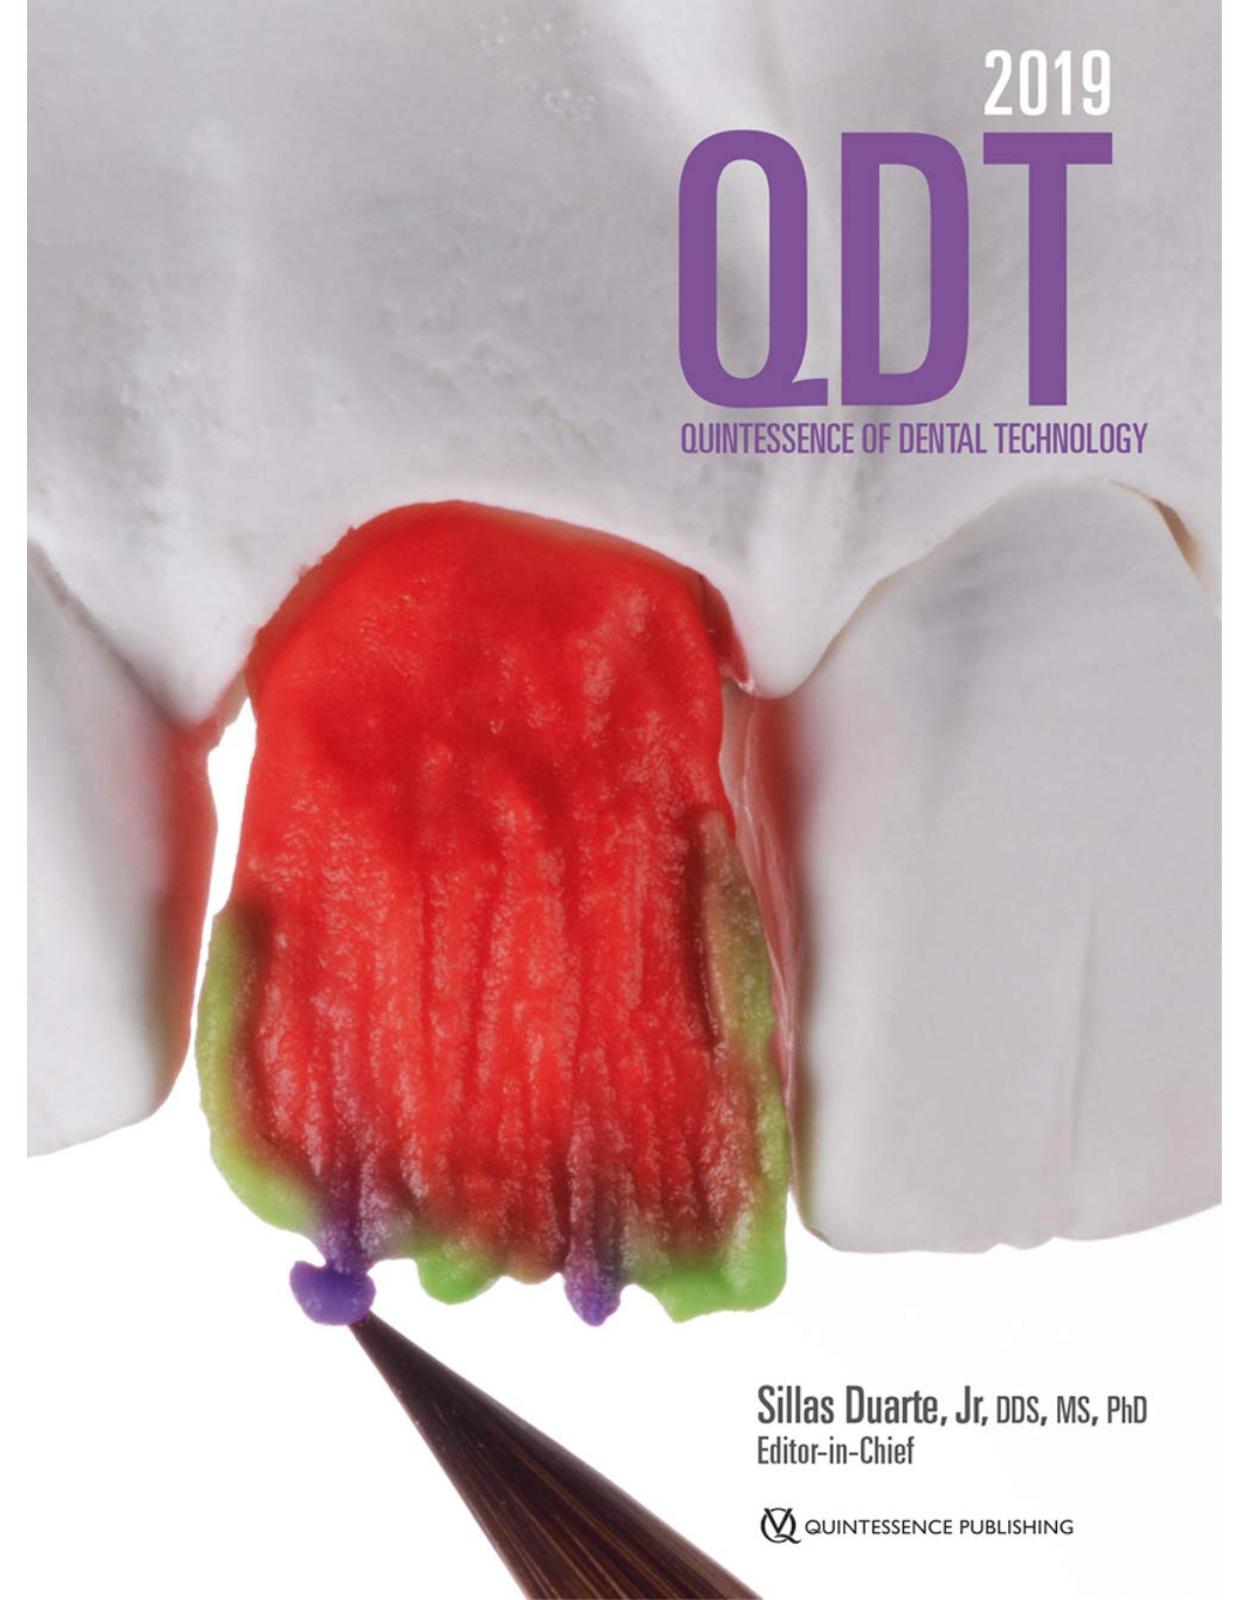 Quintessence of Dental Technology Yearbook 2019